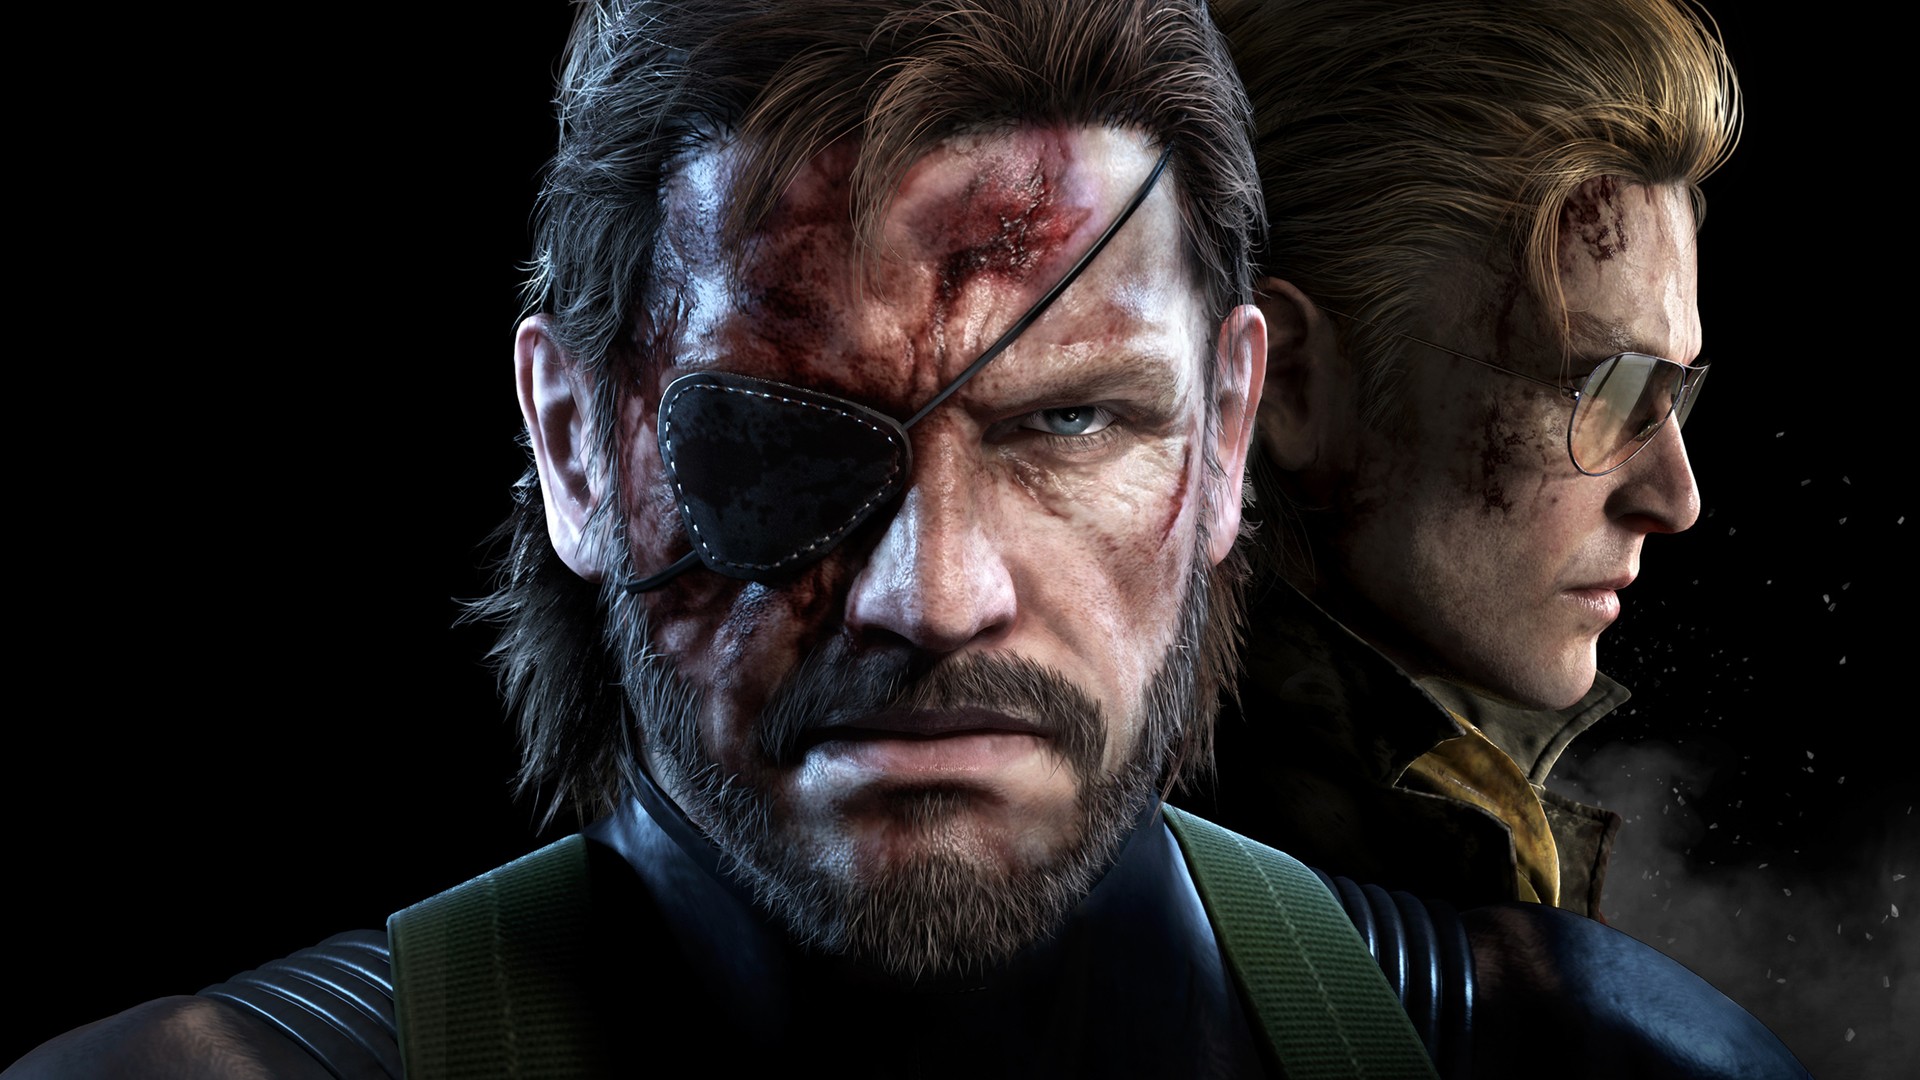 General 1920x1080 Metal Gear Solid  Metal Gear Solid V: Ground Zeroes Metal Gear video game characters